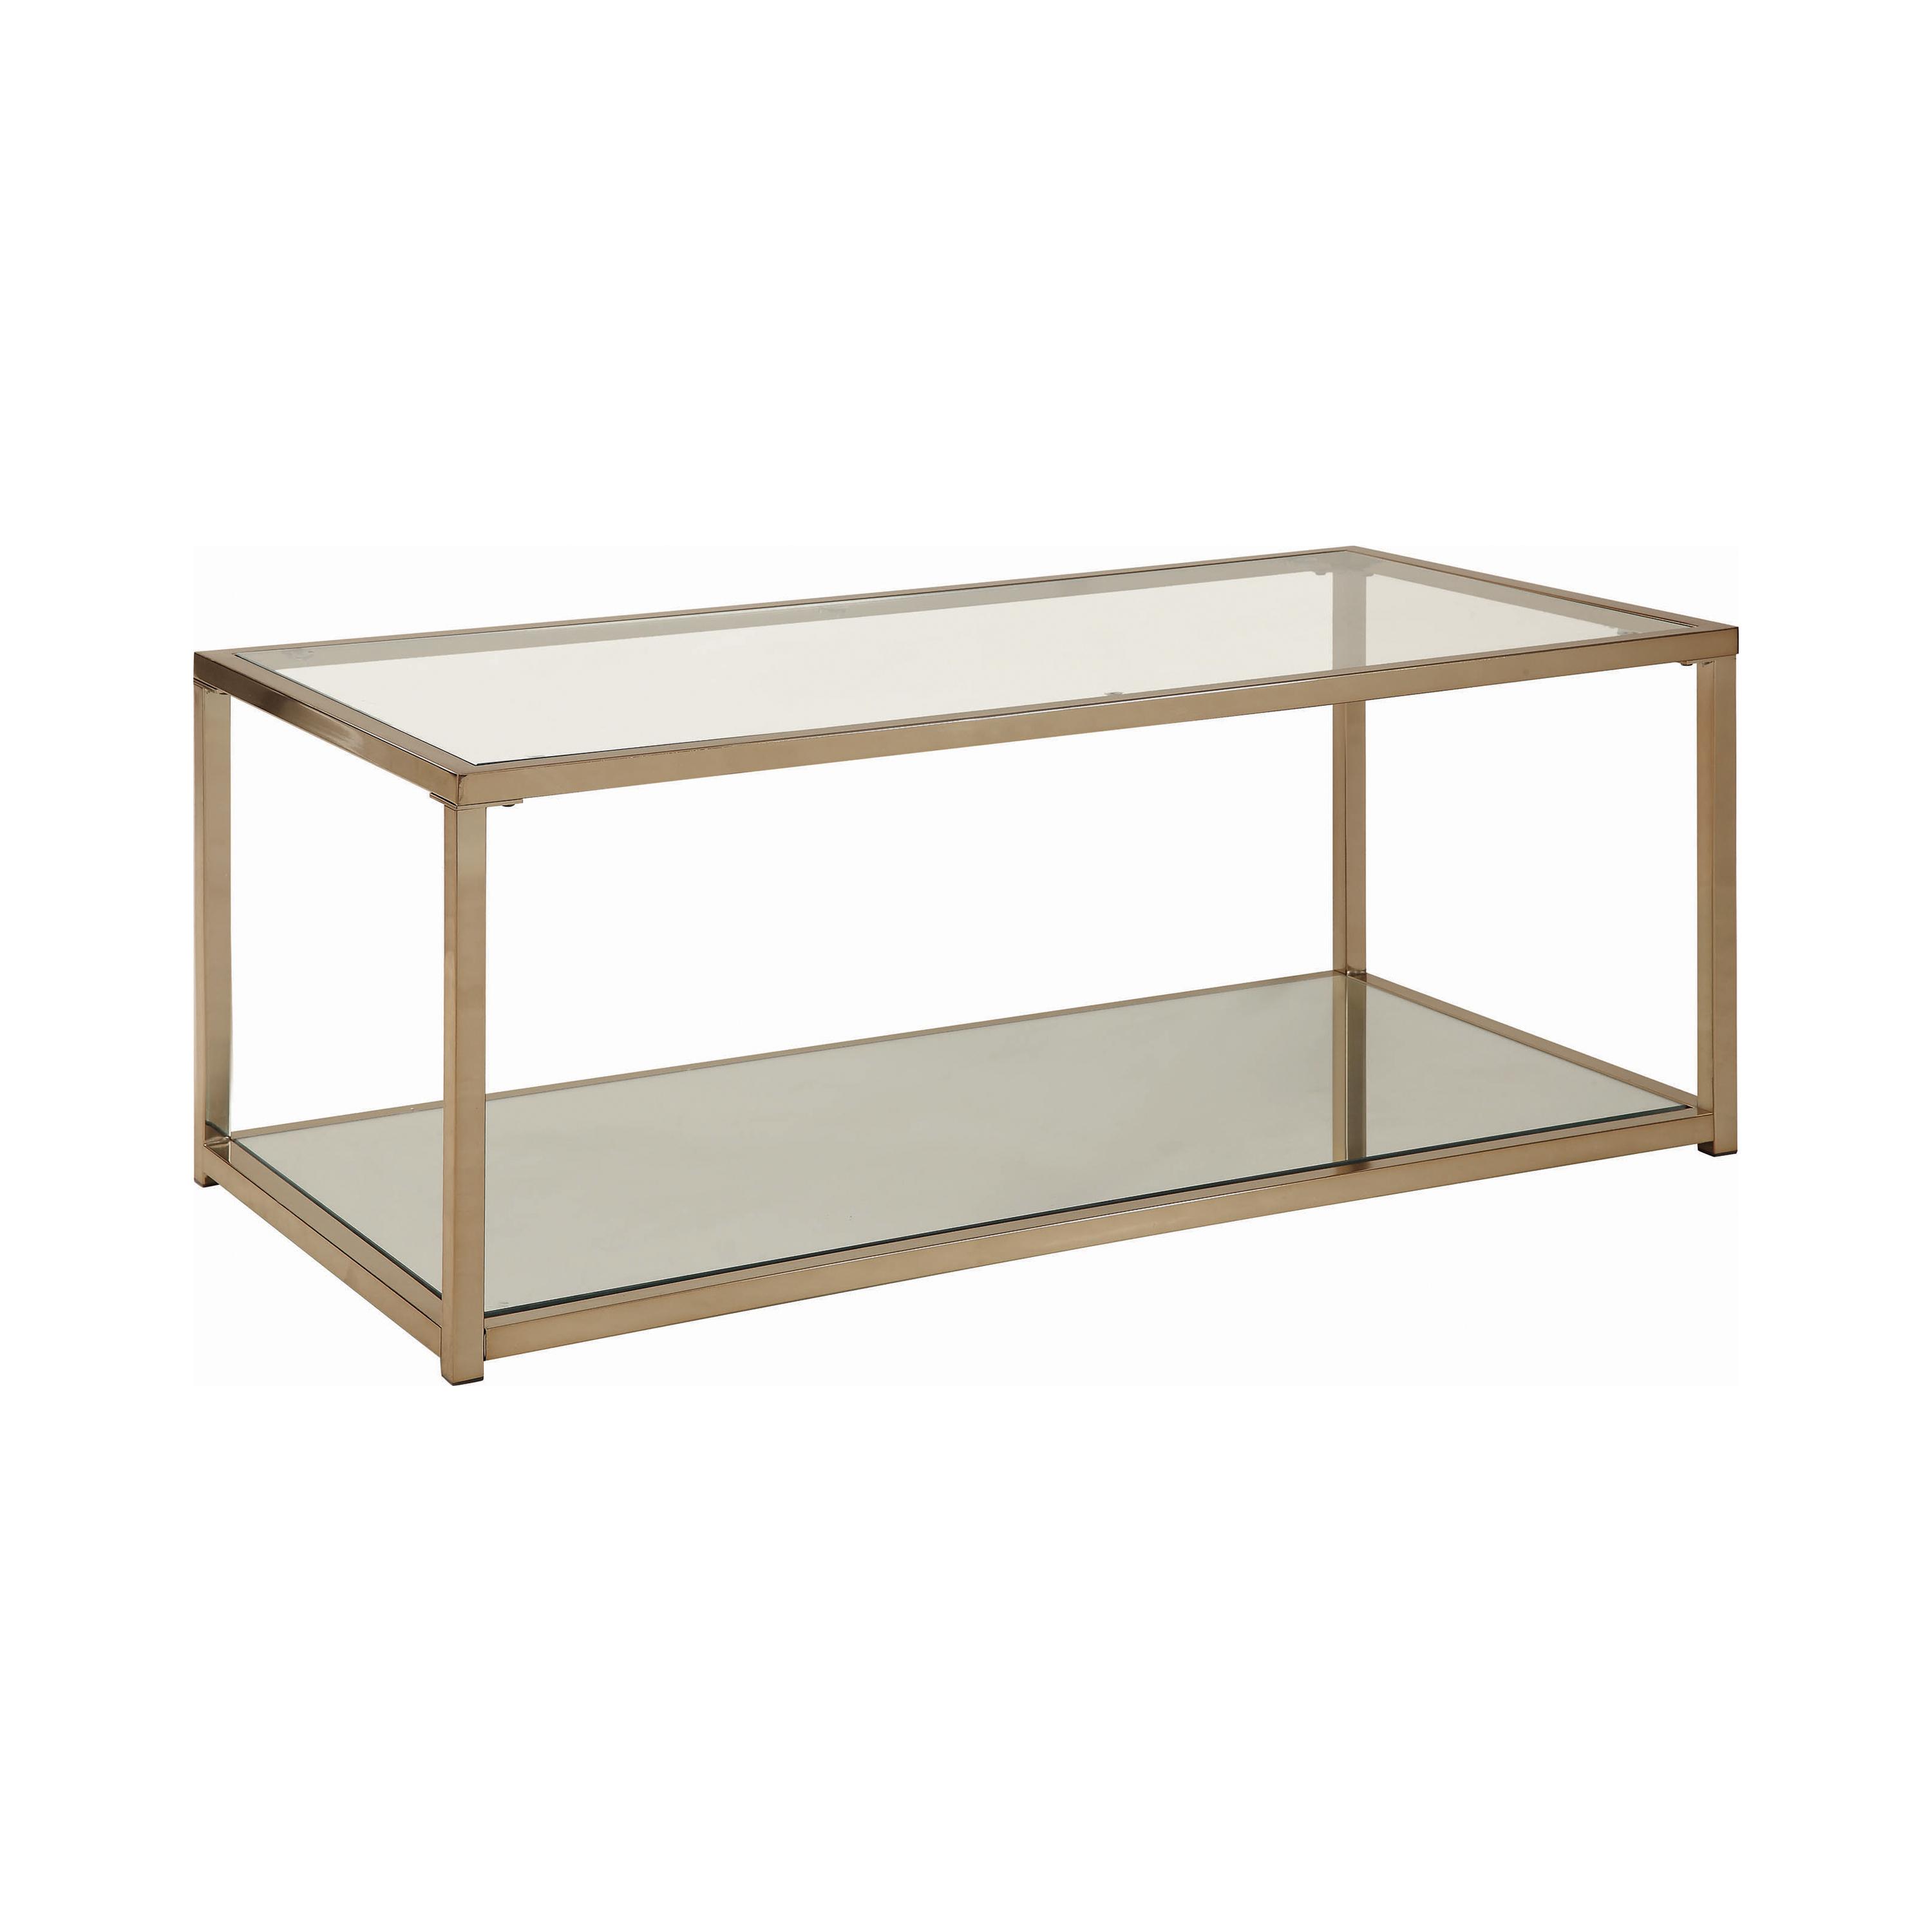 Transitional Coffee Table 705238 705238 in Chrome 